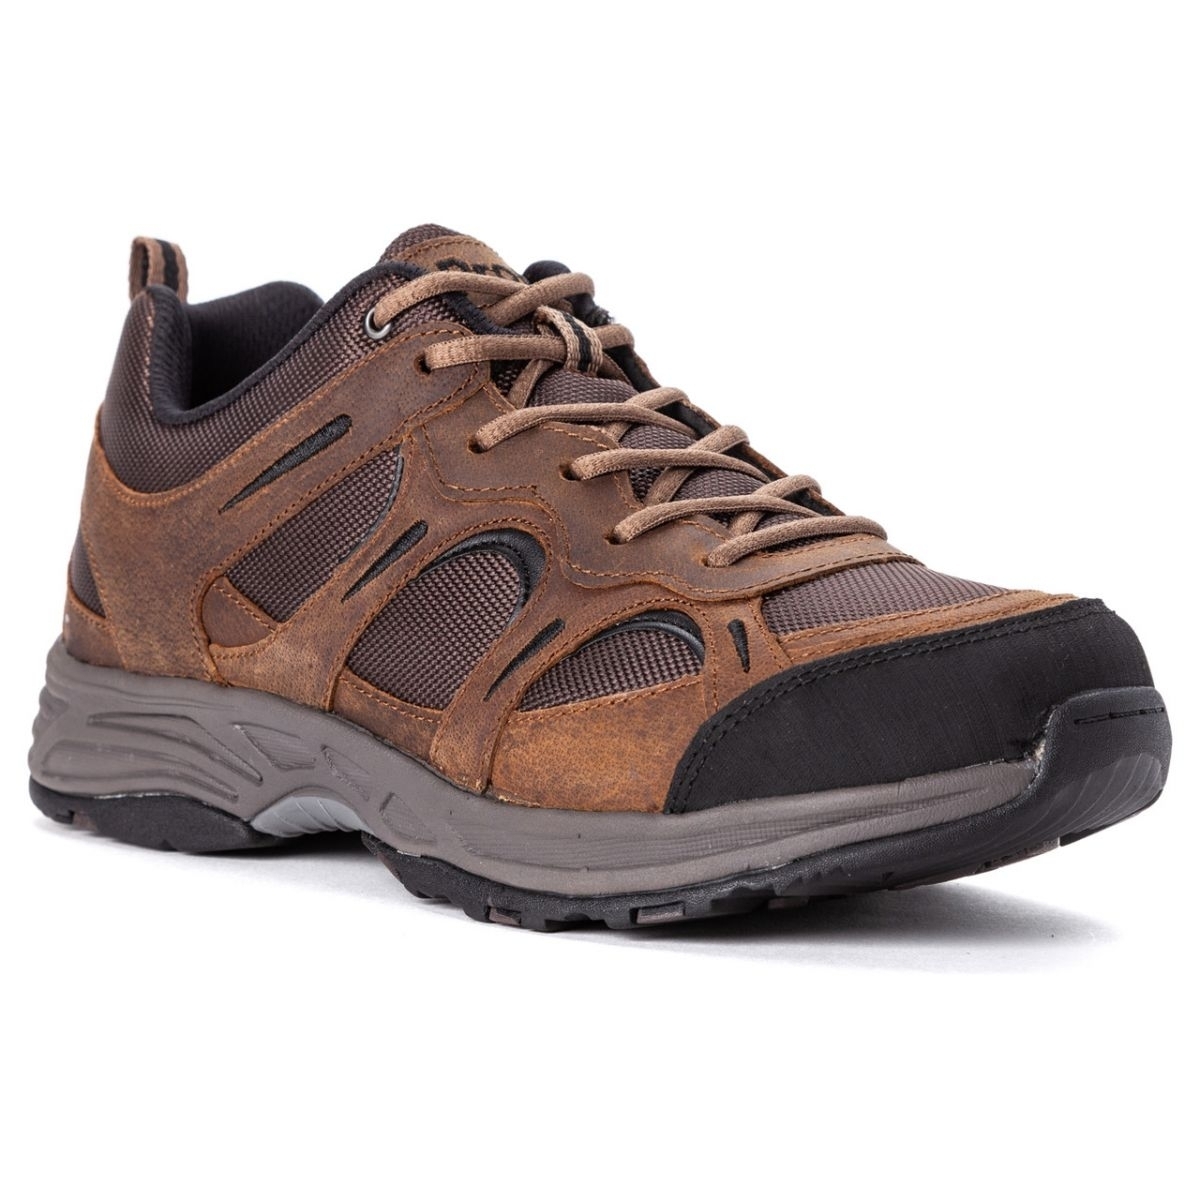 Propet Men's Connelly Hiking Shoe Brown - M5503BR BROWN - BROWN, 9.5-3E